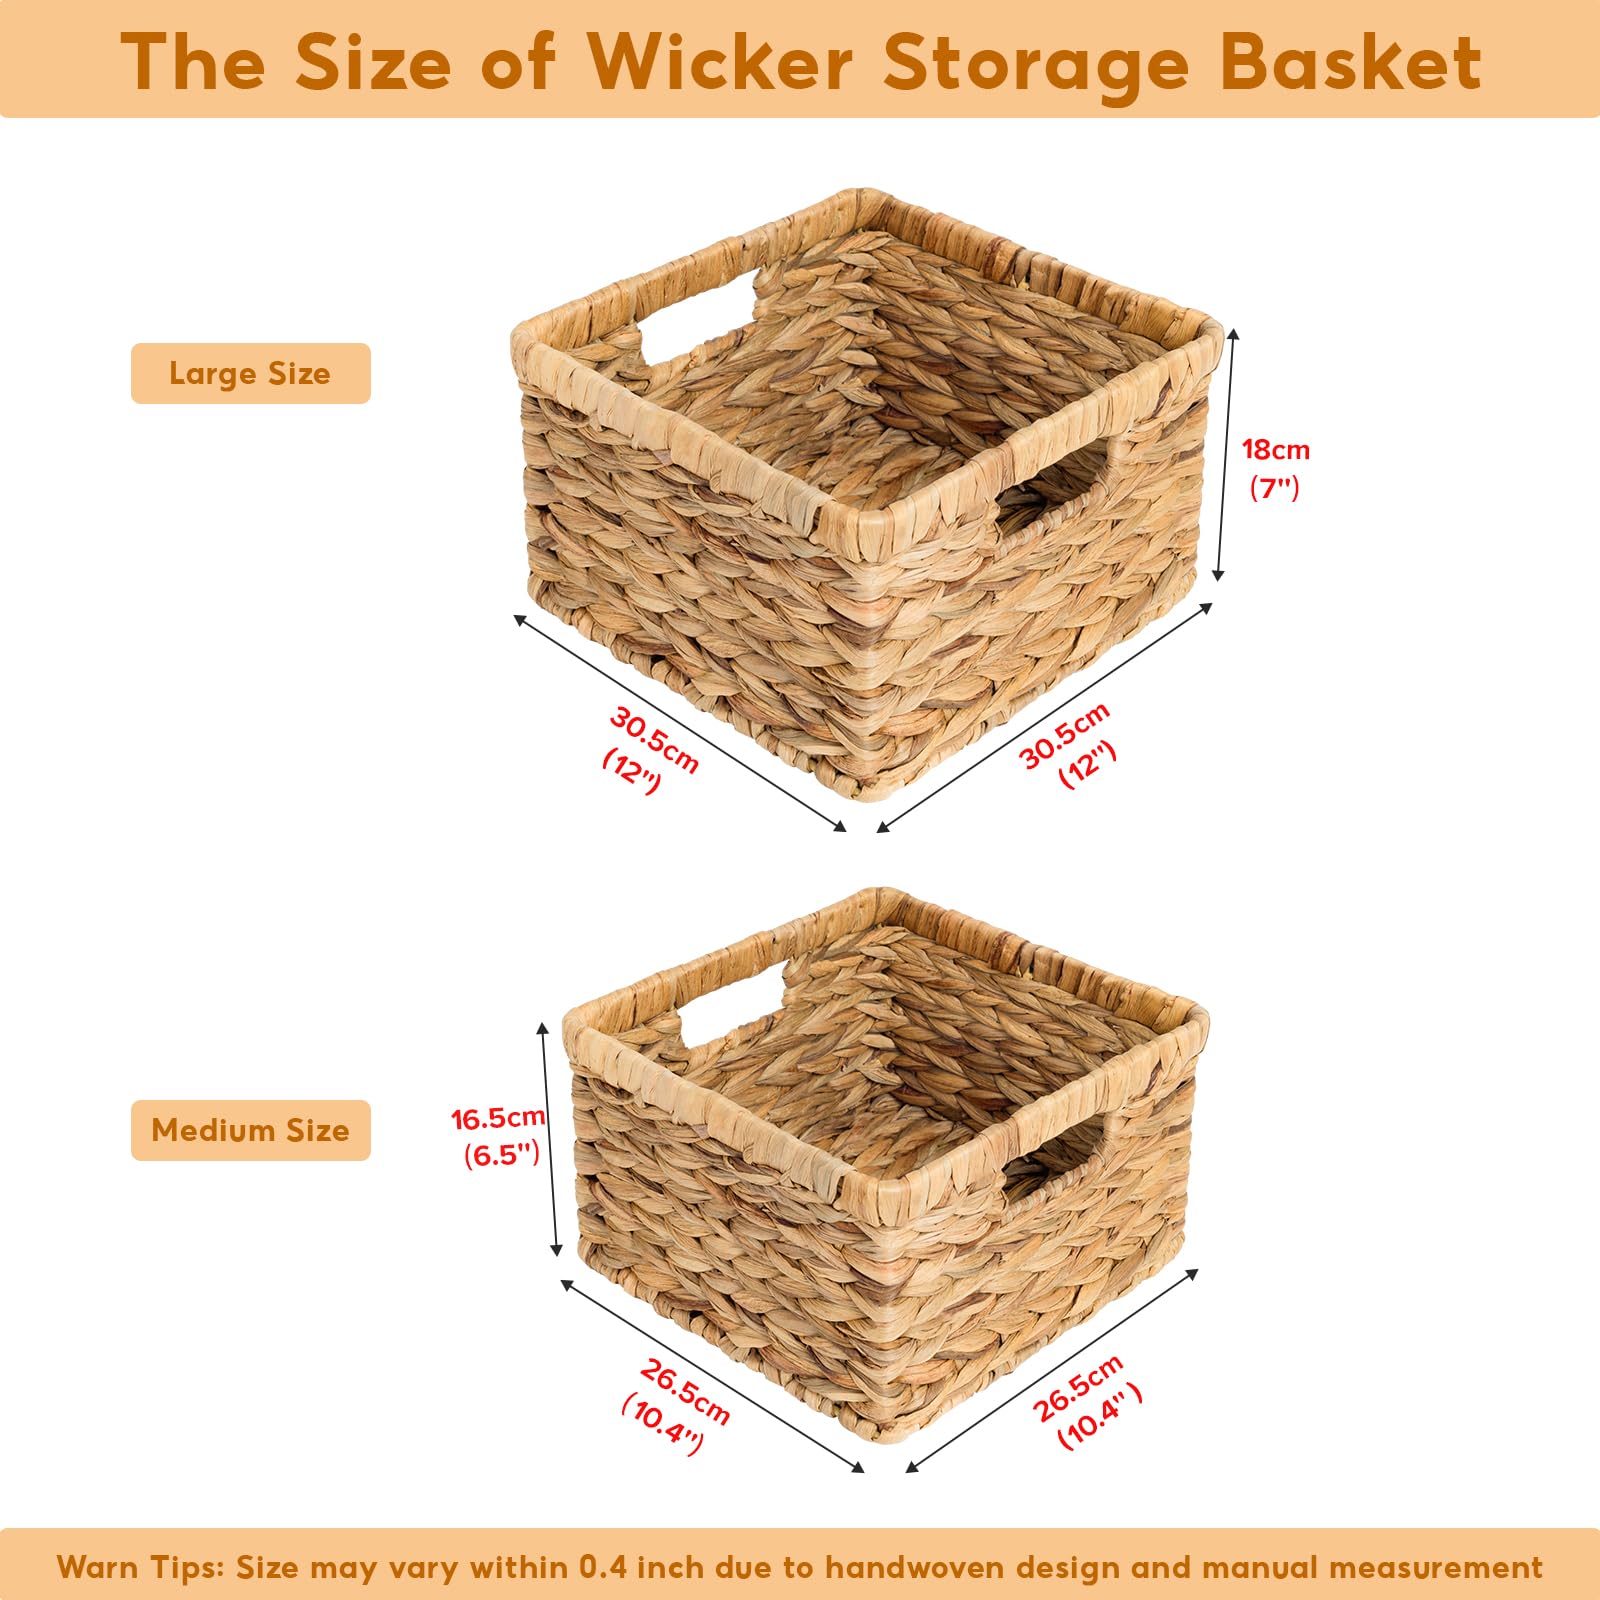 OEHID Wicker Baskets for Storage Water Hyacinth Storage Baskets Wicker Storage Basket, Large Wicker Basket Wicker Baskets for Shelves Pantry Baskets, Rectangular Storage Baskets with Handles, 2 Pack